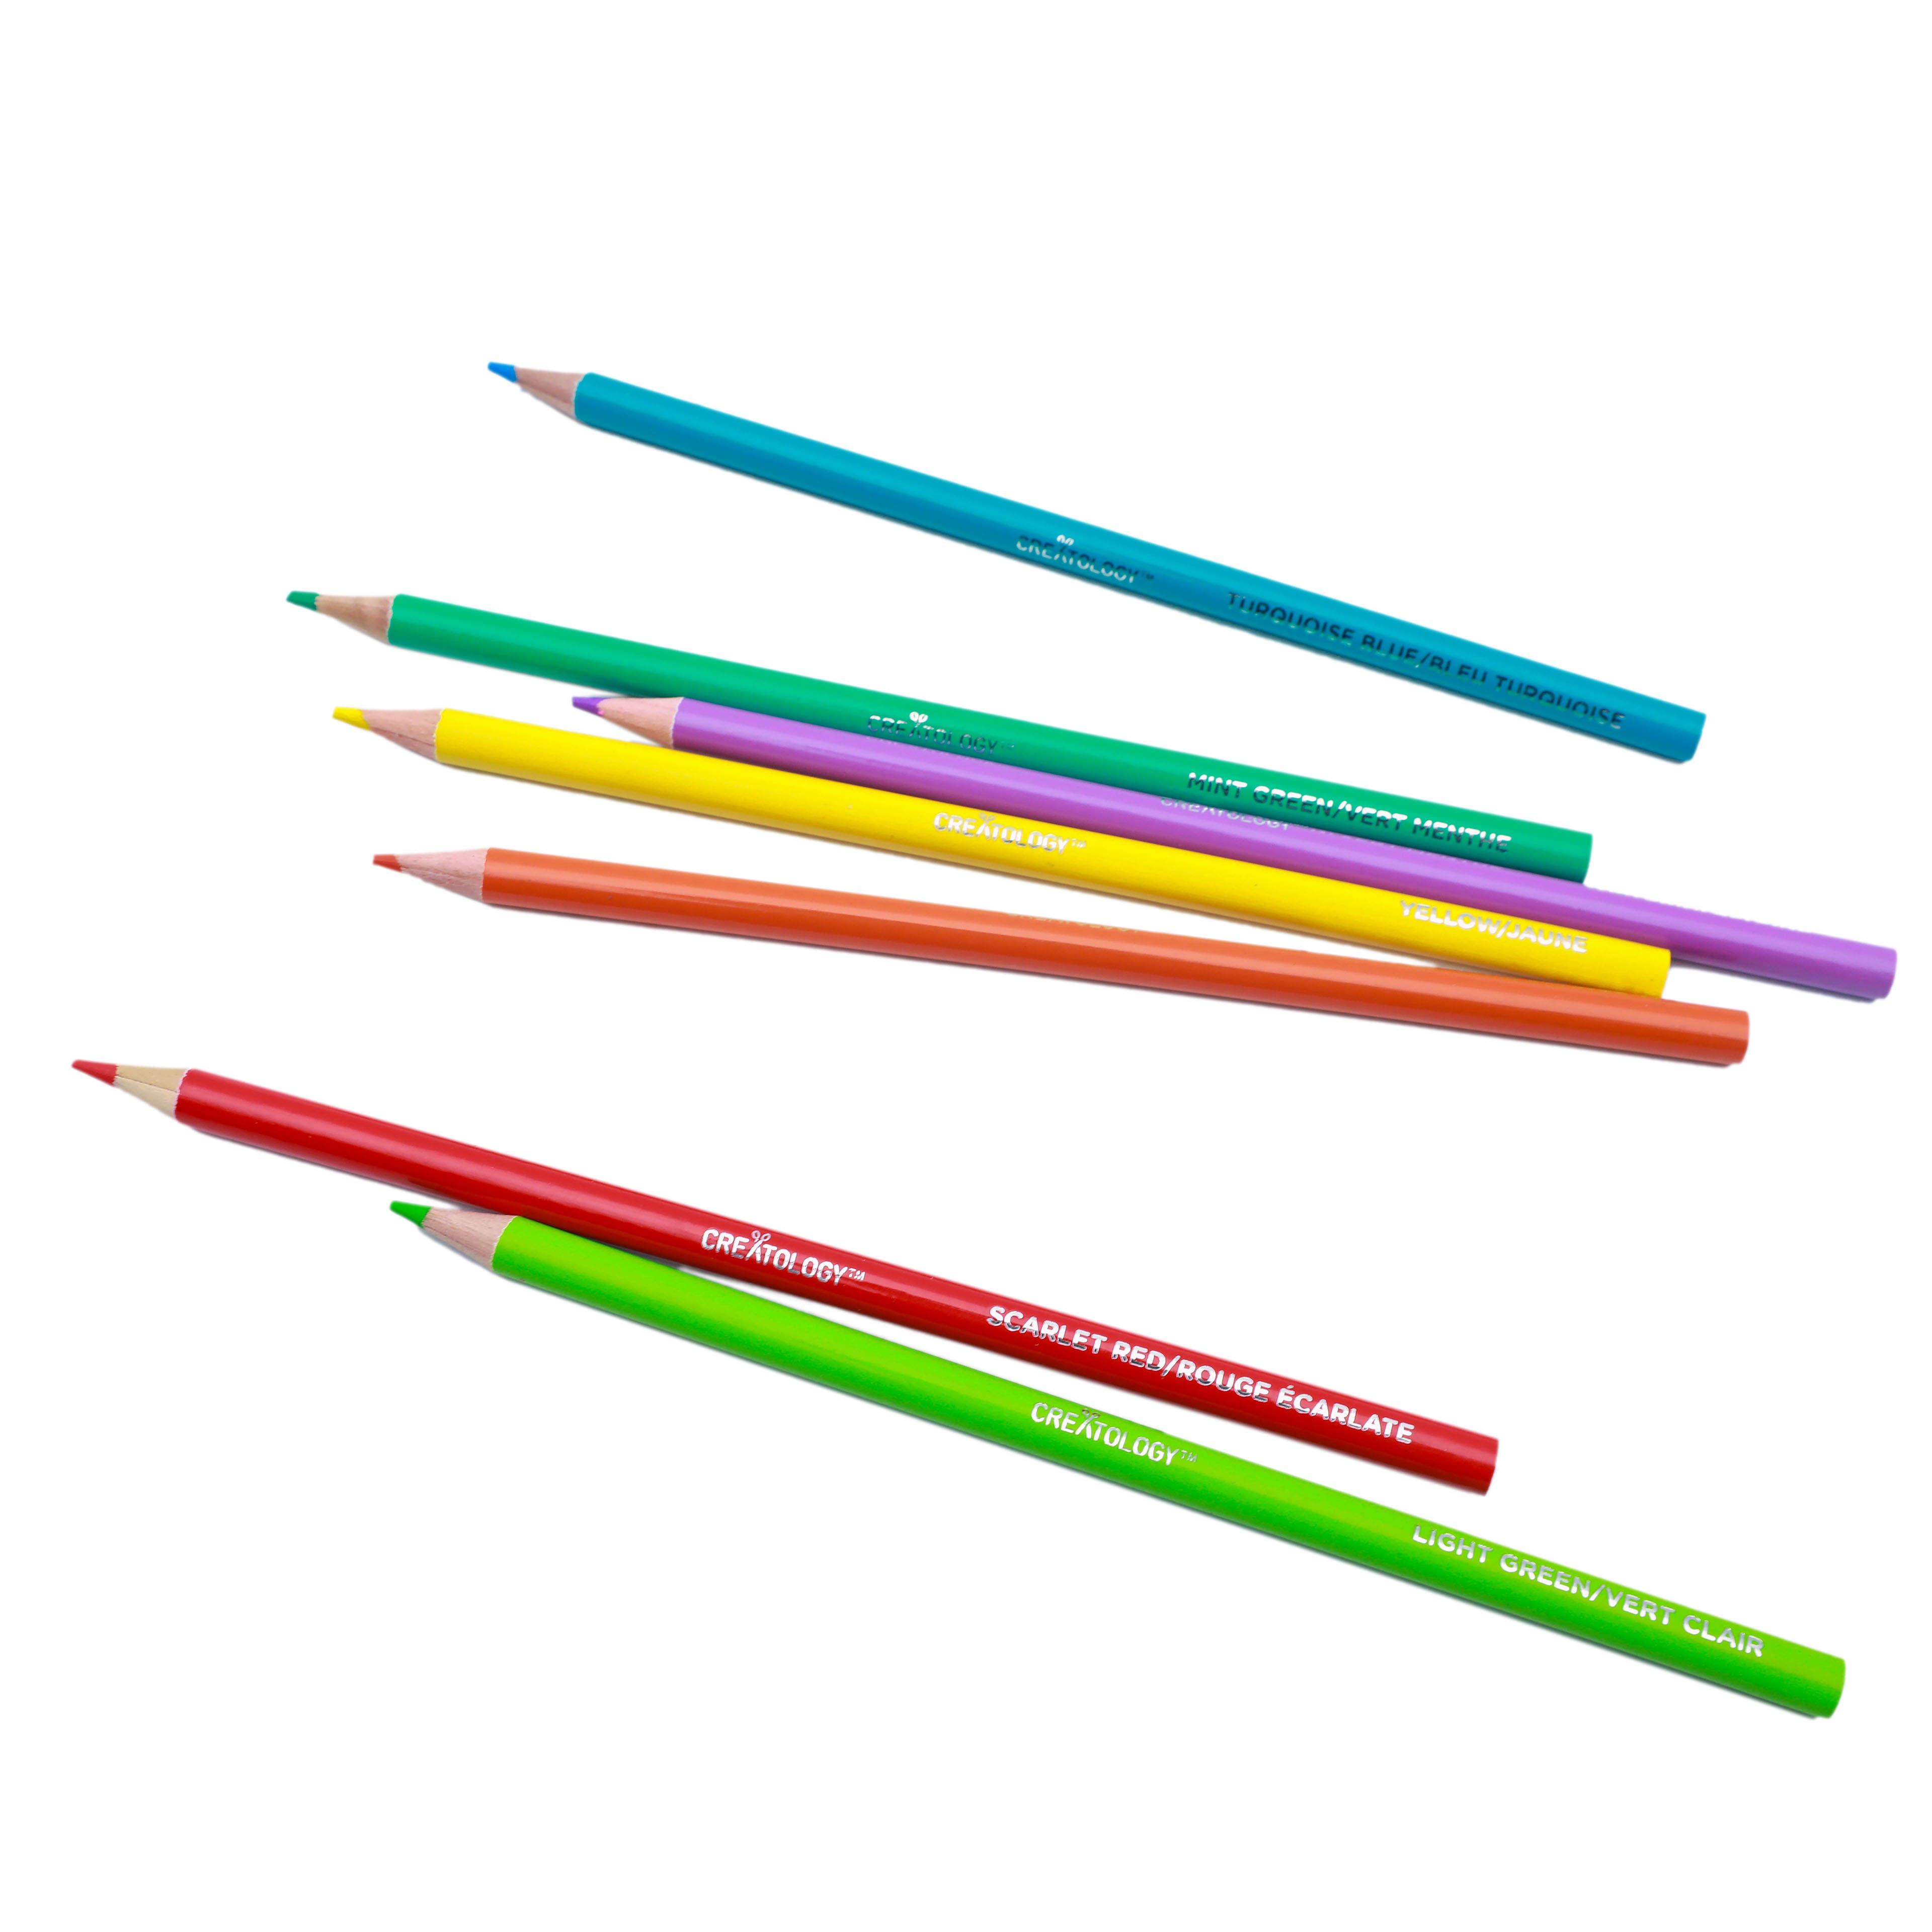 Colouring Pencils & Crayons, Hobbies & Crafts, Stationery & Newsagent, Household